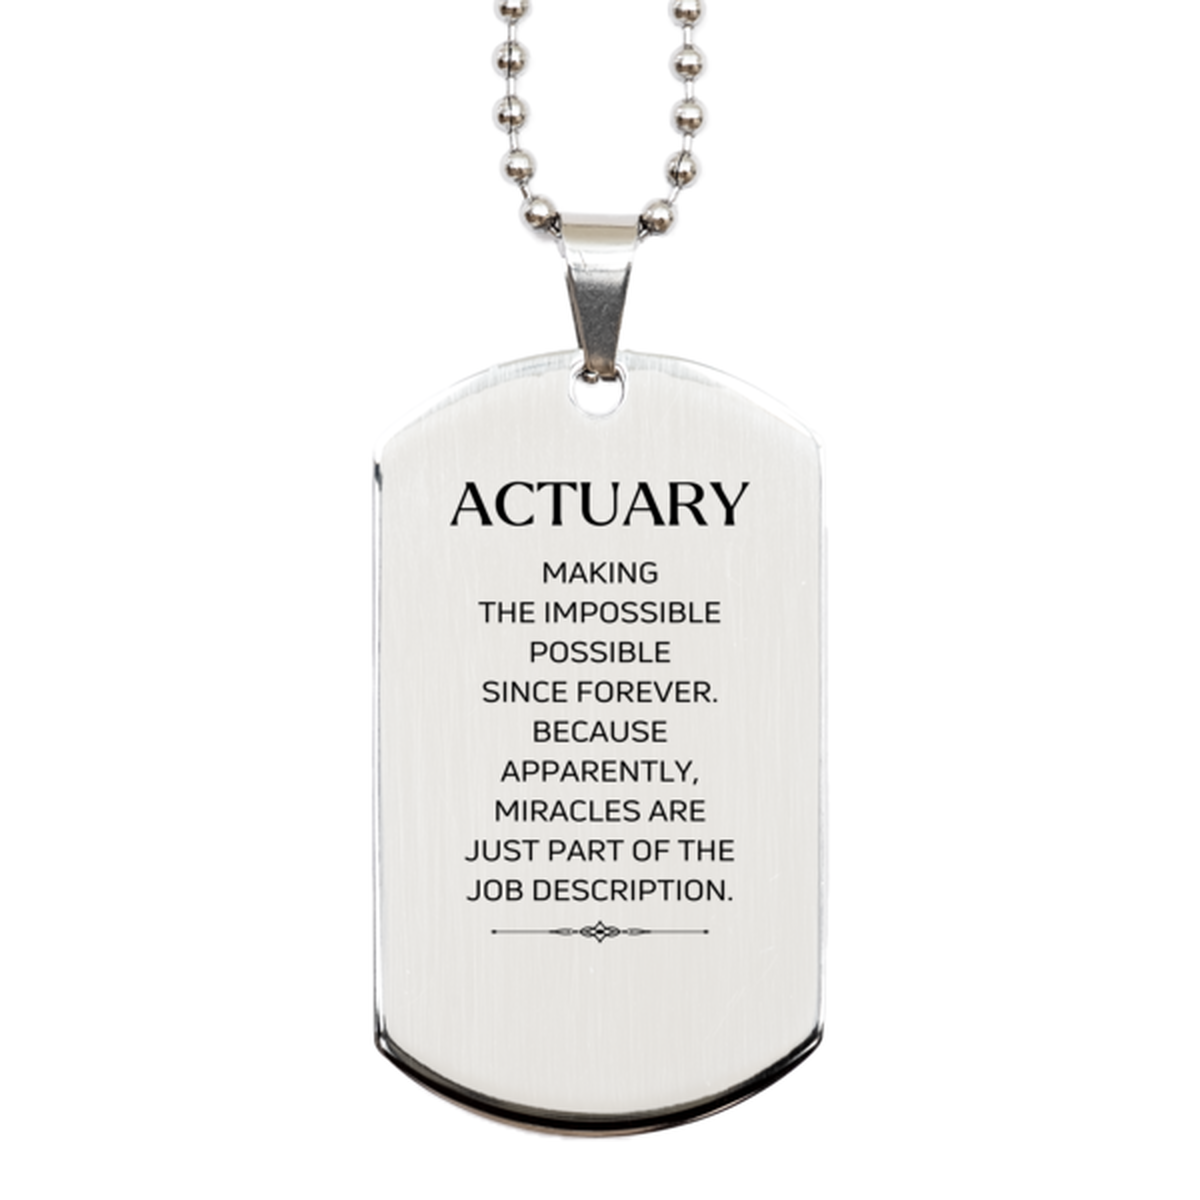 Funny Actuary Gifts, Miracles are just part of the job description, Inspirational Birthday Silver Dog Tag For Actuary, Men, Women, Coworkers, Friends, Boss